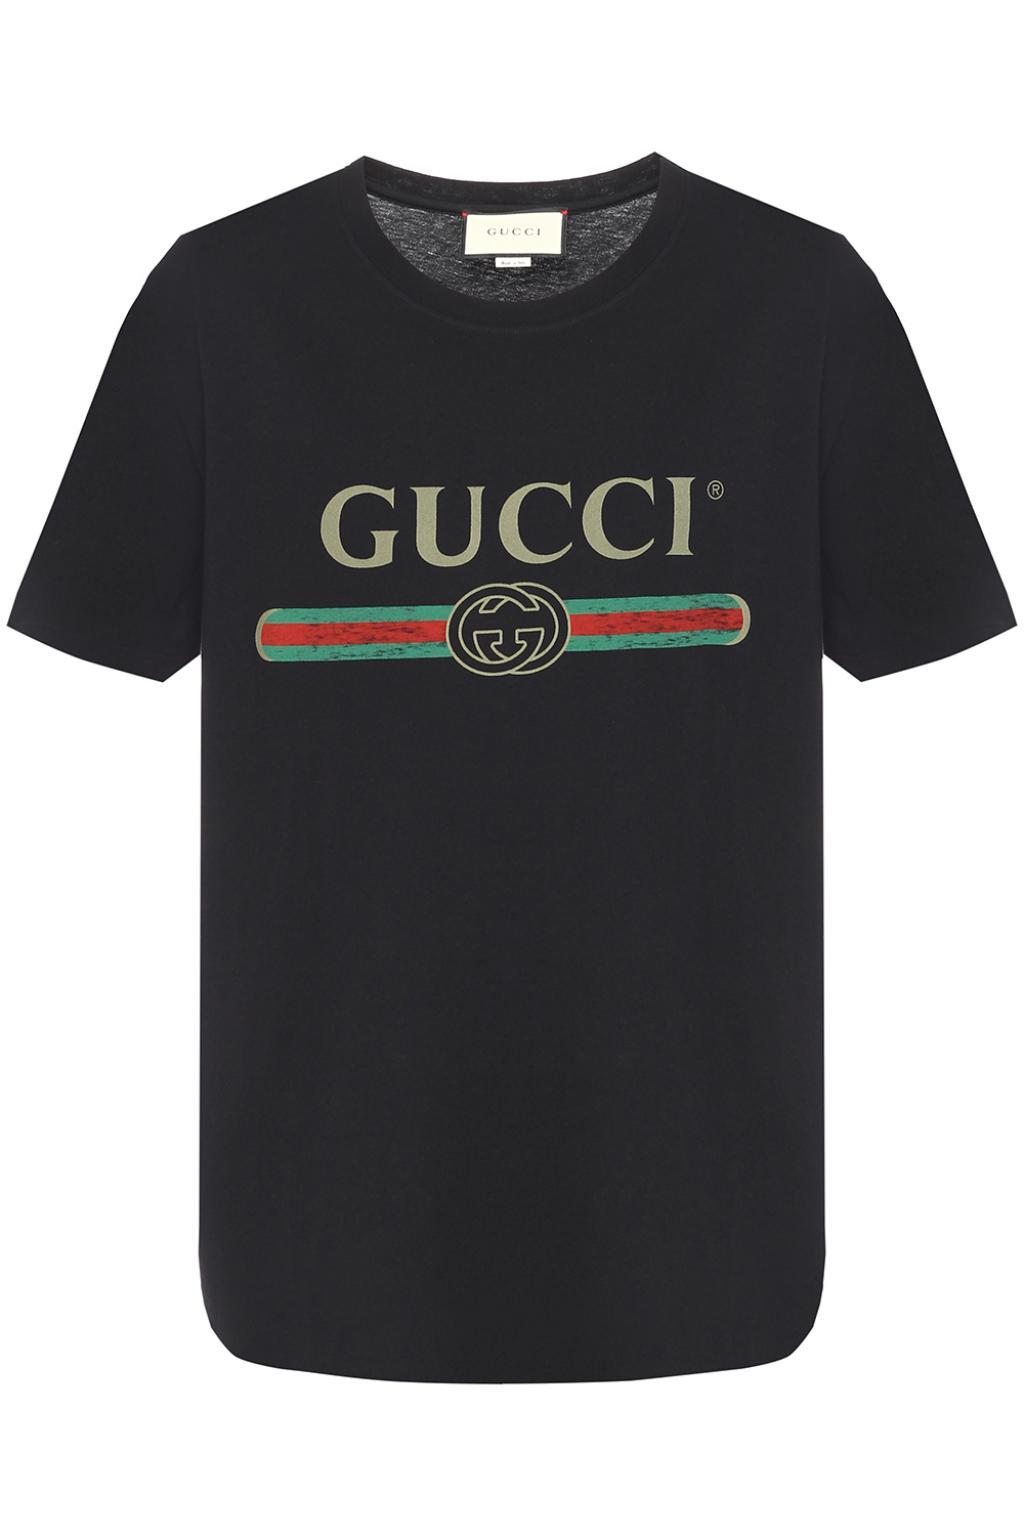 gucci t shirts prices